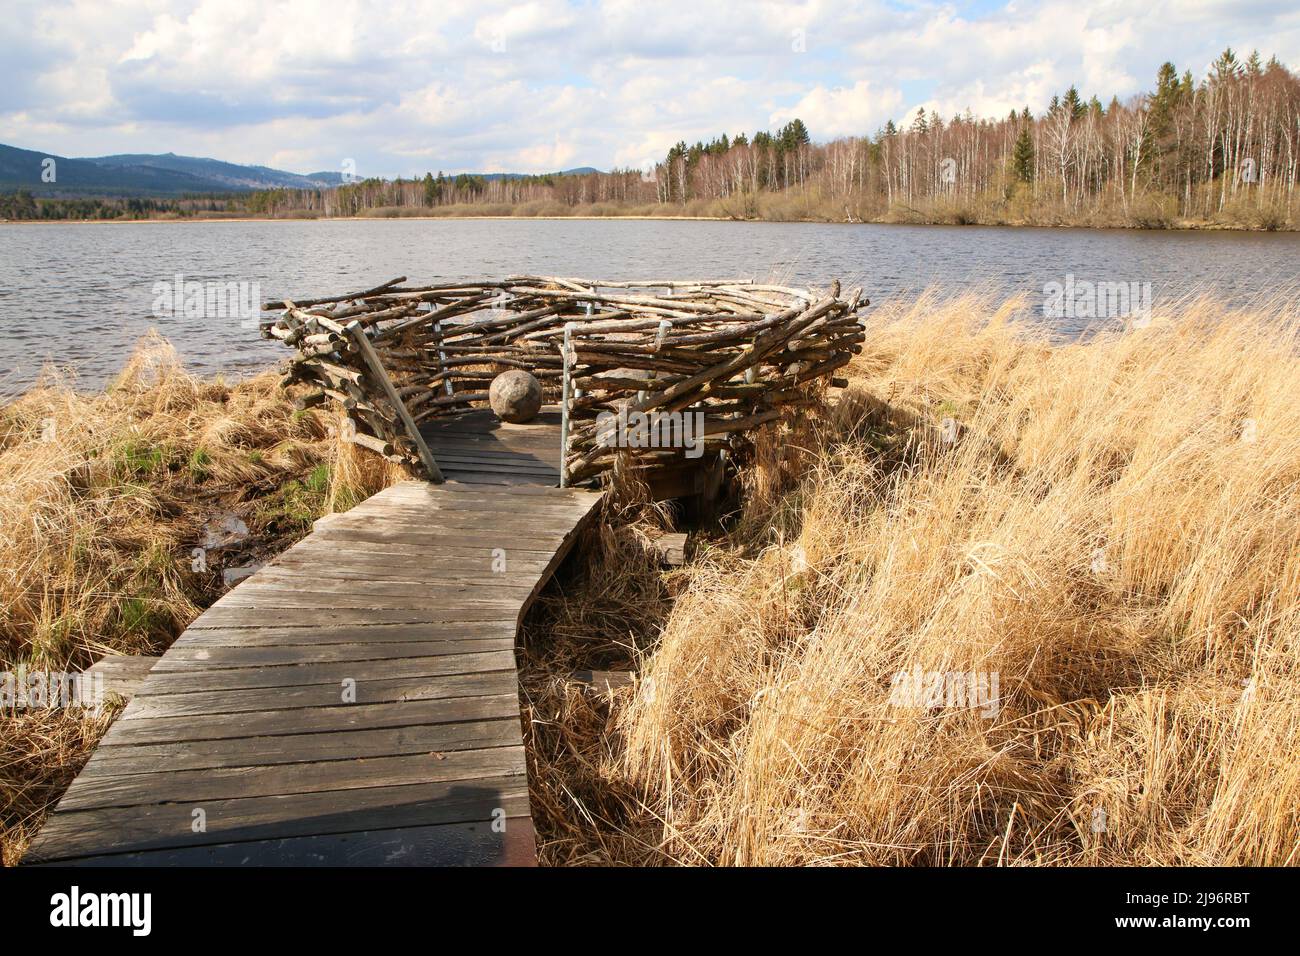 The protected area in Šumava national park in Czech Republic by the pond Olšina with its wooden pathways with a nest made of the branches. Stock Photo